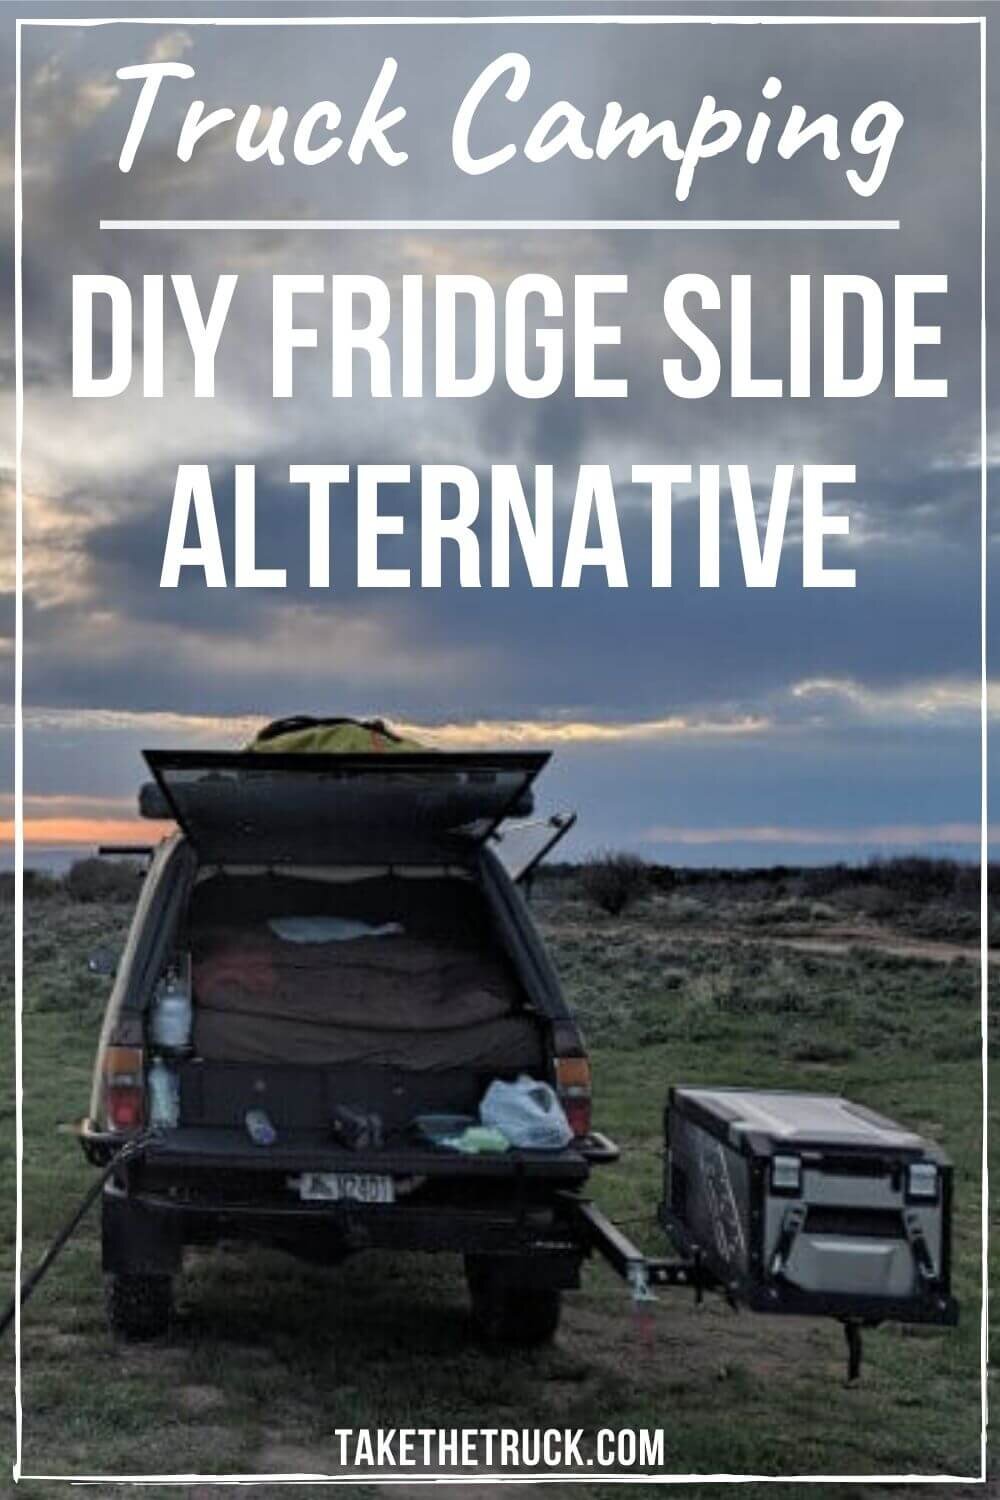 Rather than using a camping fridge slide, check out this DIY camping fridge hack for mounting off your hitch! This works especially well when truck bed camping with an ARB Elements Fridge.